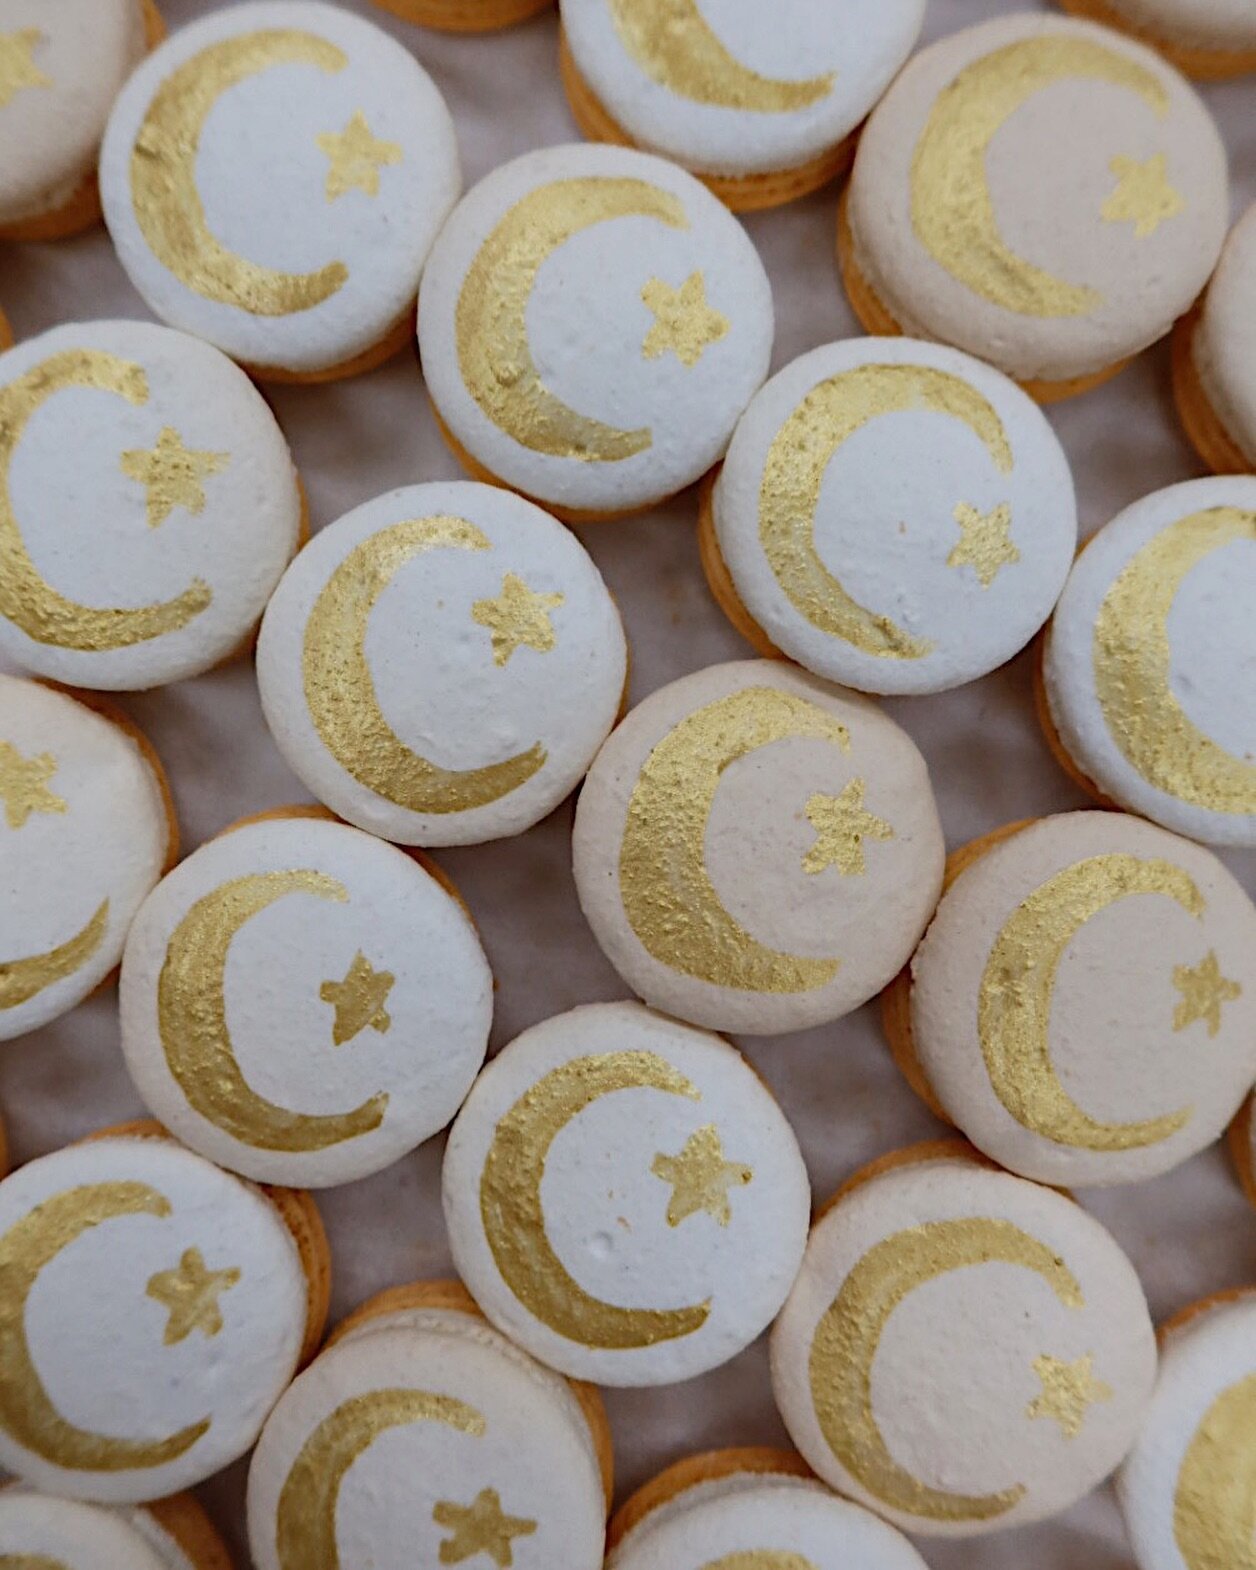 Eid Mubarak to those observing Ramadan this month! We&rsquo;ve made an exclusive hand-painted crescent moon and star macaron in the flavour Honey Almond Orange Blossom to add a touch of sweetness to your upcoming celebrations with family and friends.